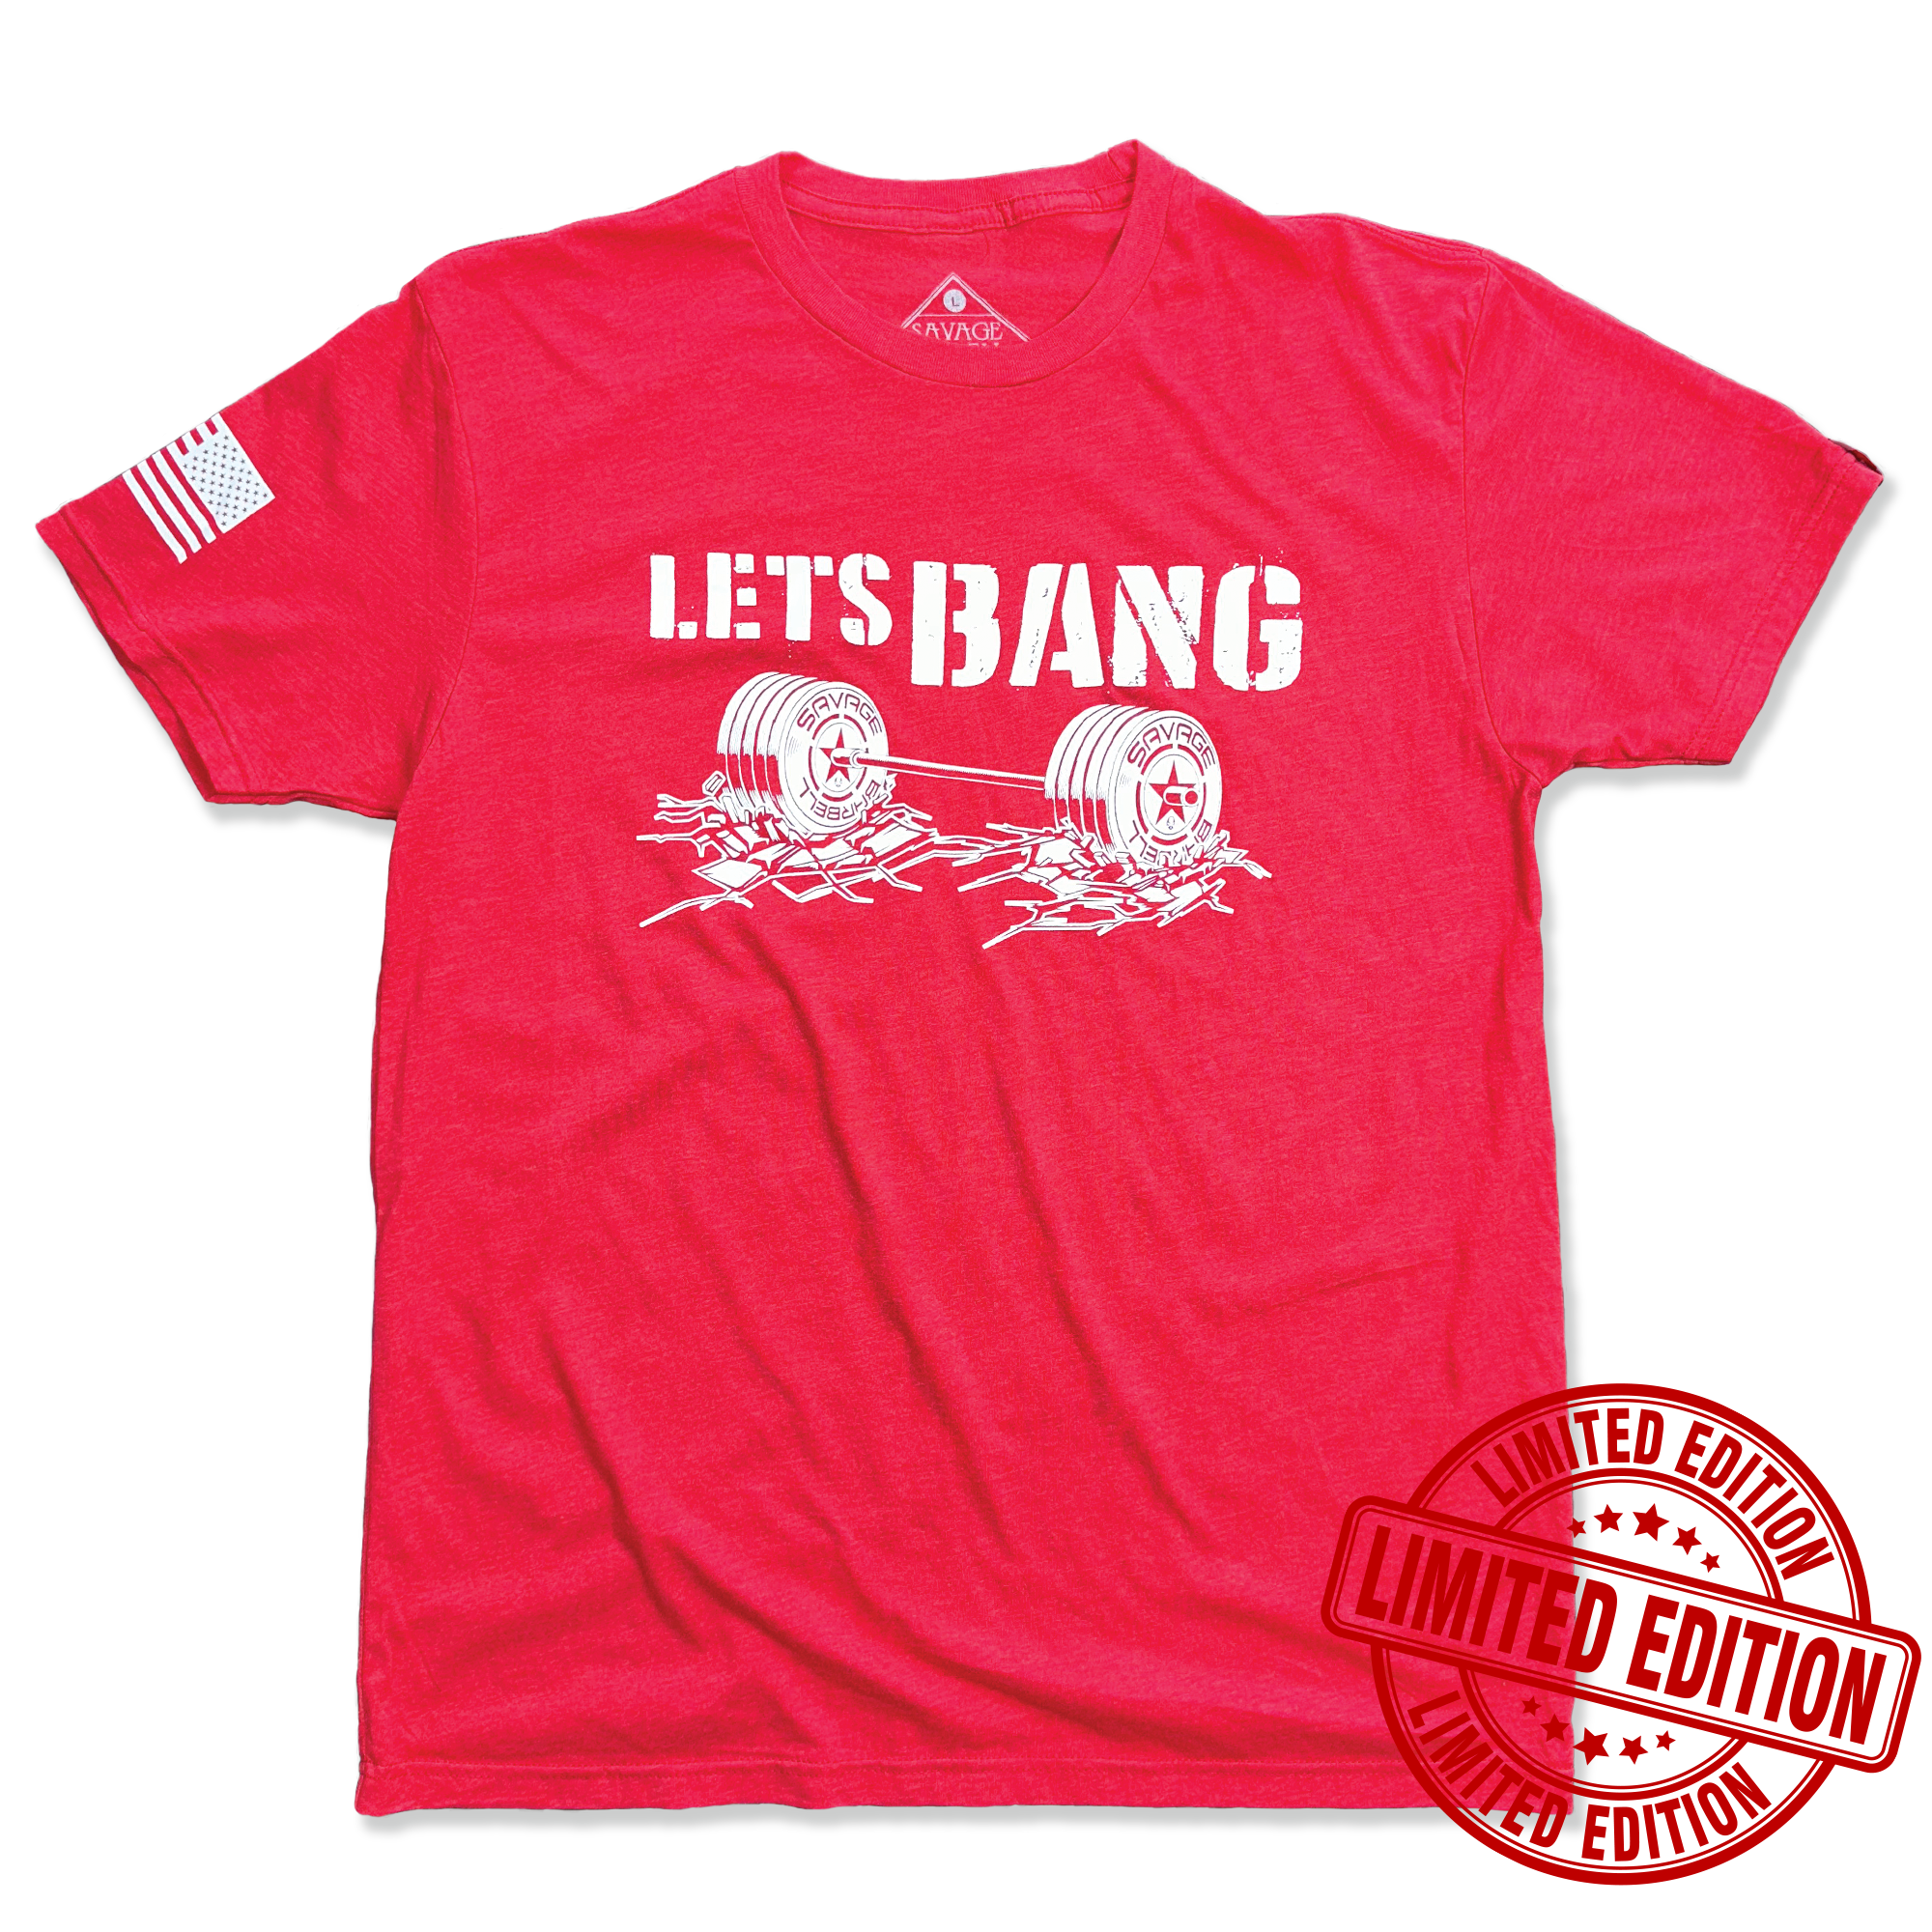 Men's T-shirt - Limited Edition - Let's Bang, 2X-Large / Red